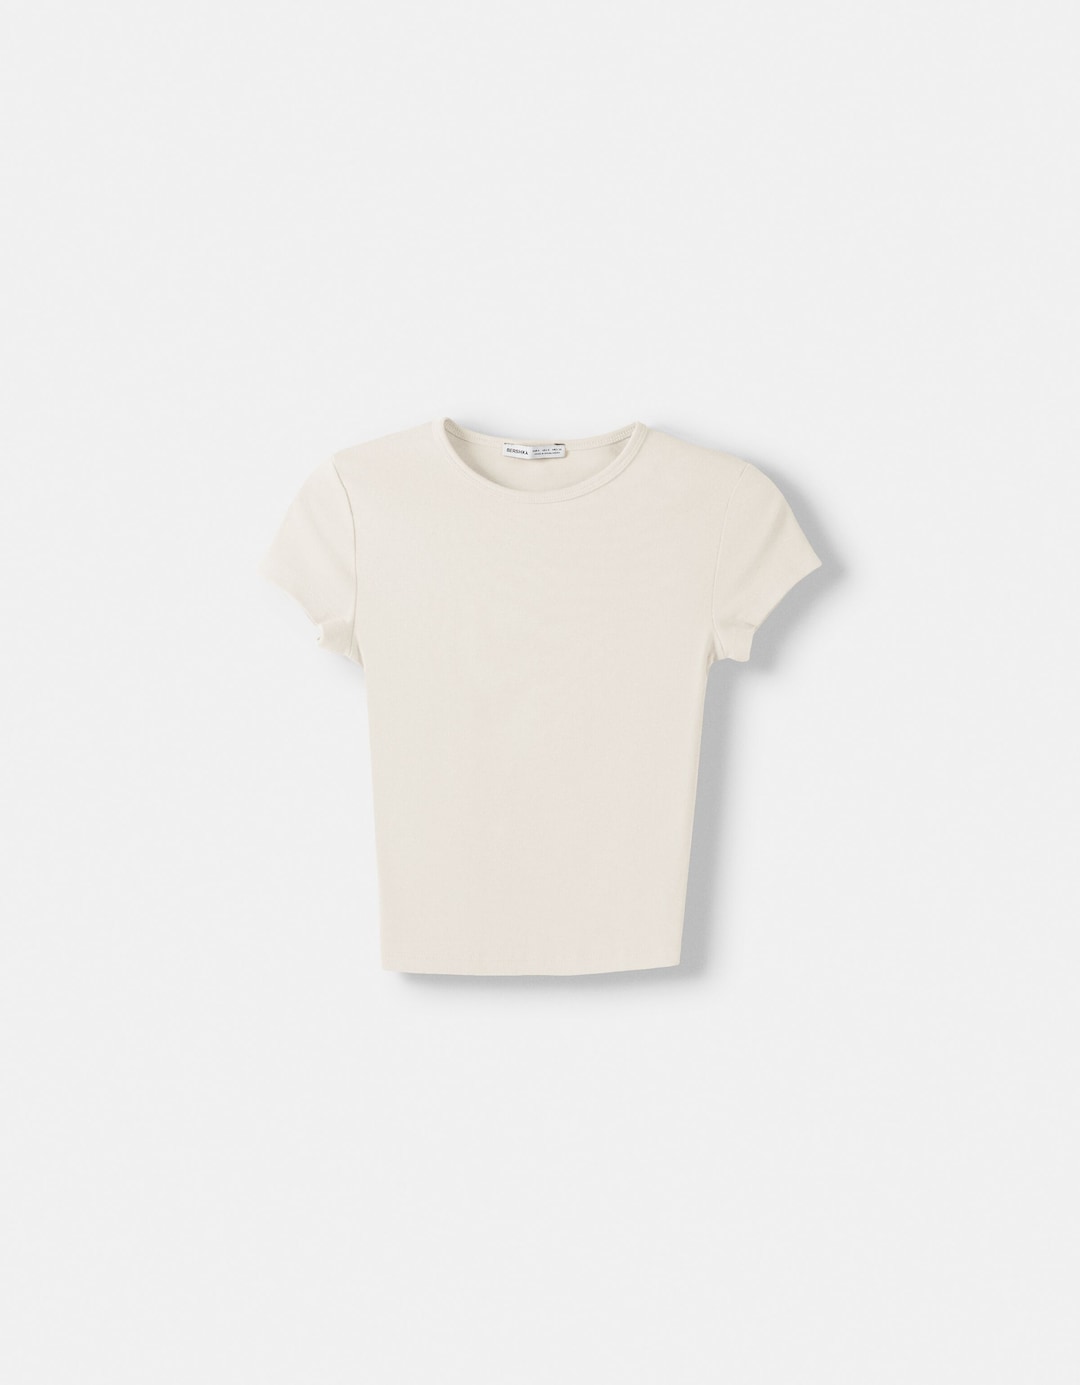 Short sleeve T-shirt with a round neck